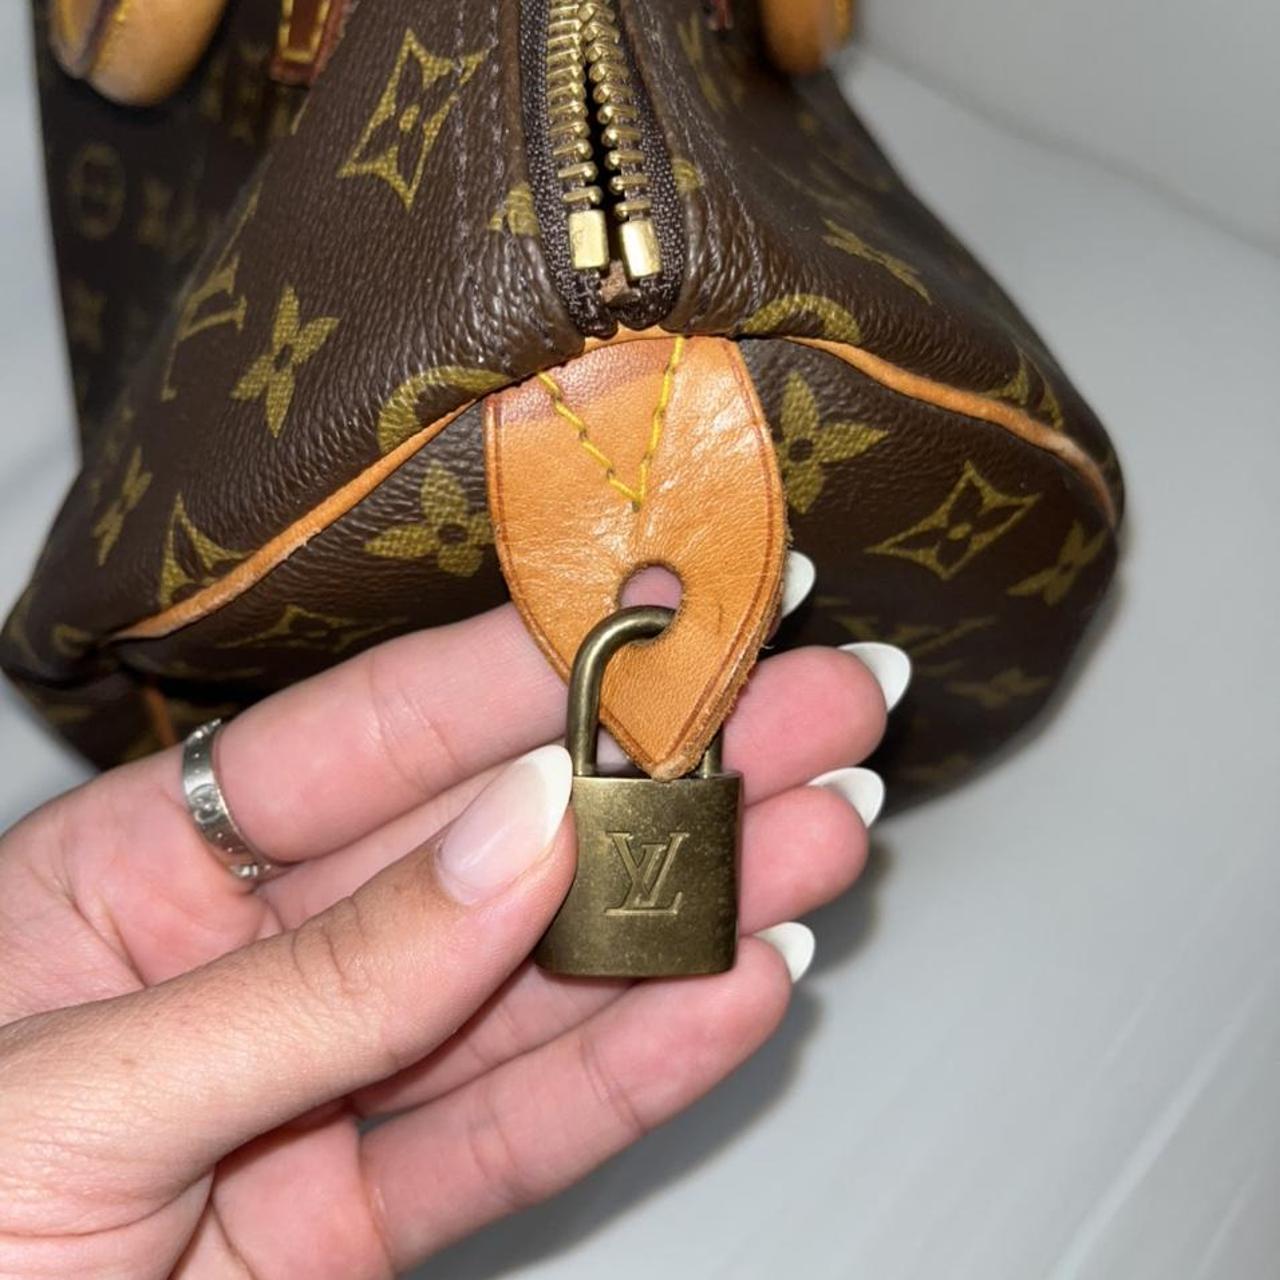 Vintage Louis Vuitton purse / bag Barely worn from - Depop